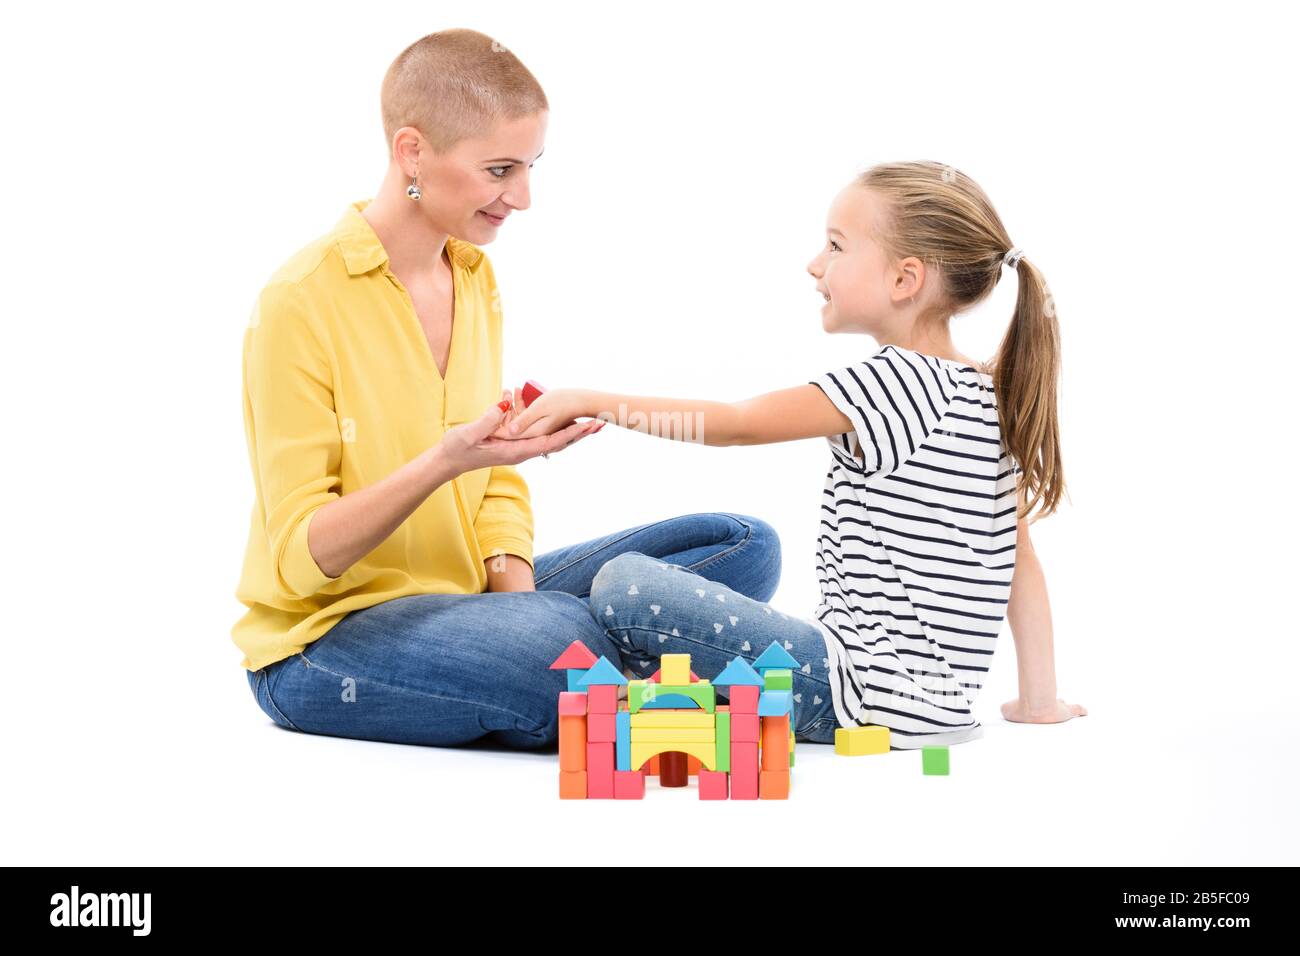 Young girl in child occupational therapy session doing sensory playful exercises with her therapist. Child therapy concept on white background. Stock Photo